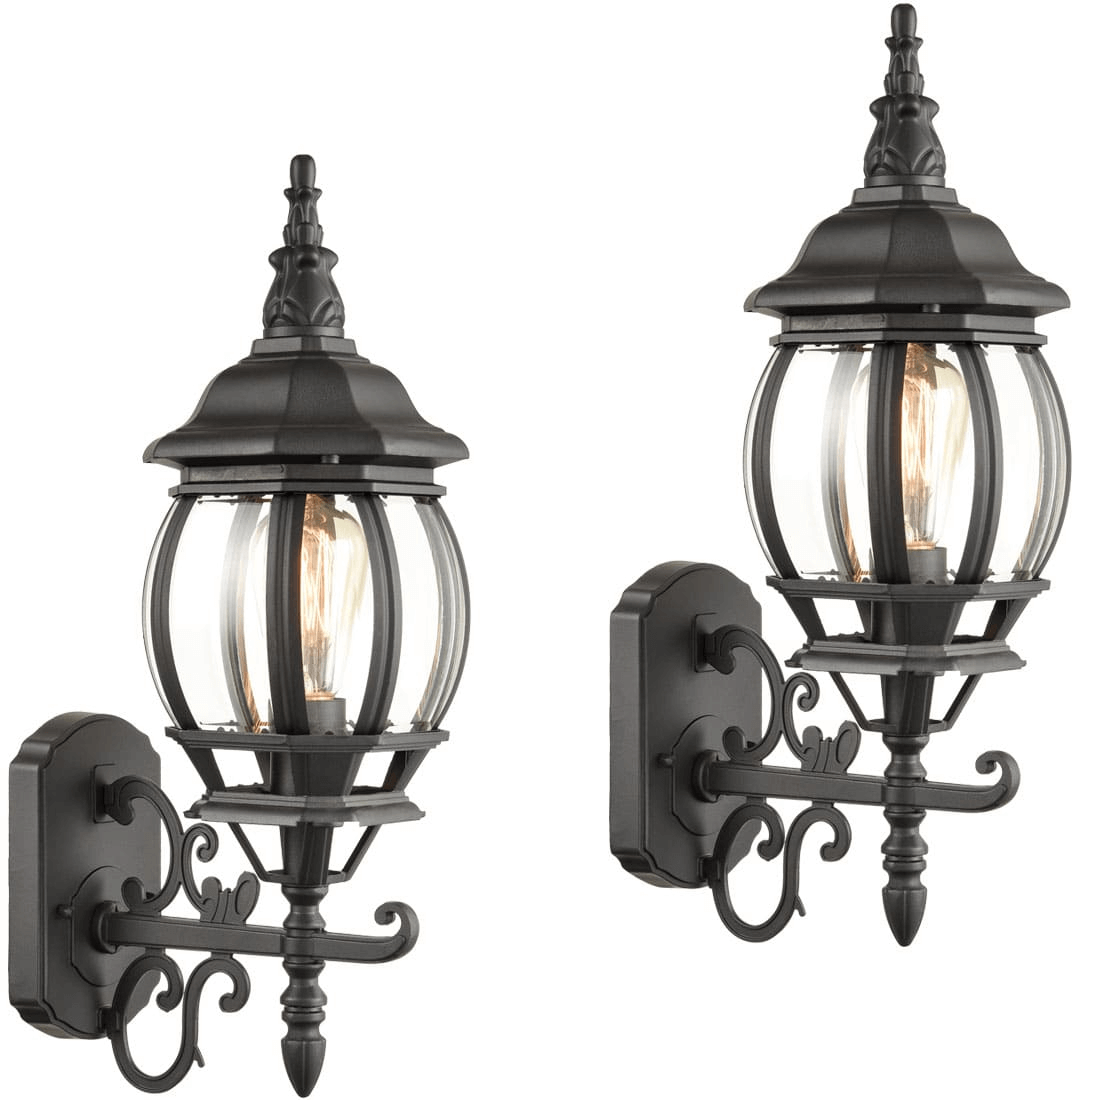 Industrial Wall Sconce in Matte Black with Waterproof Exterior